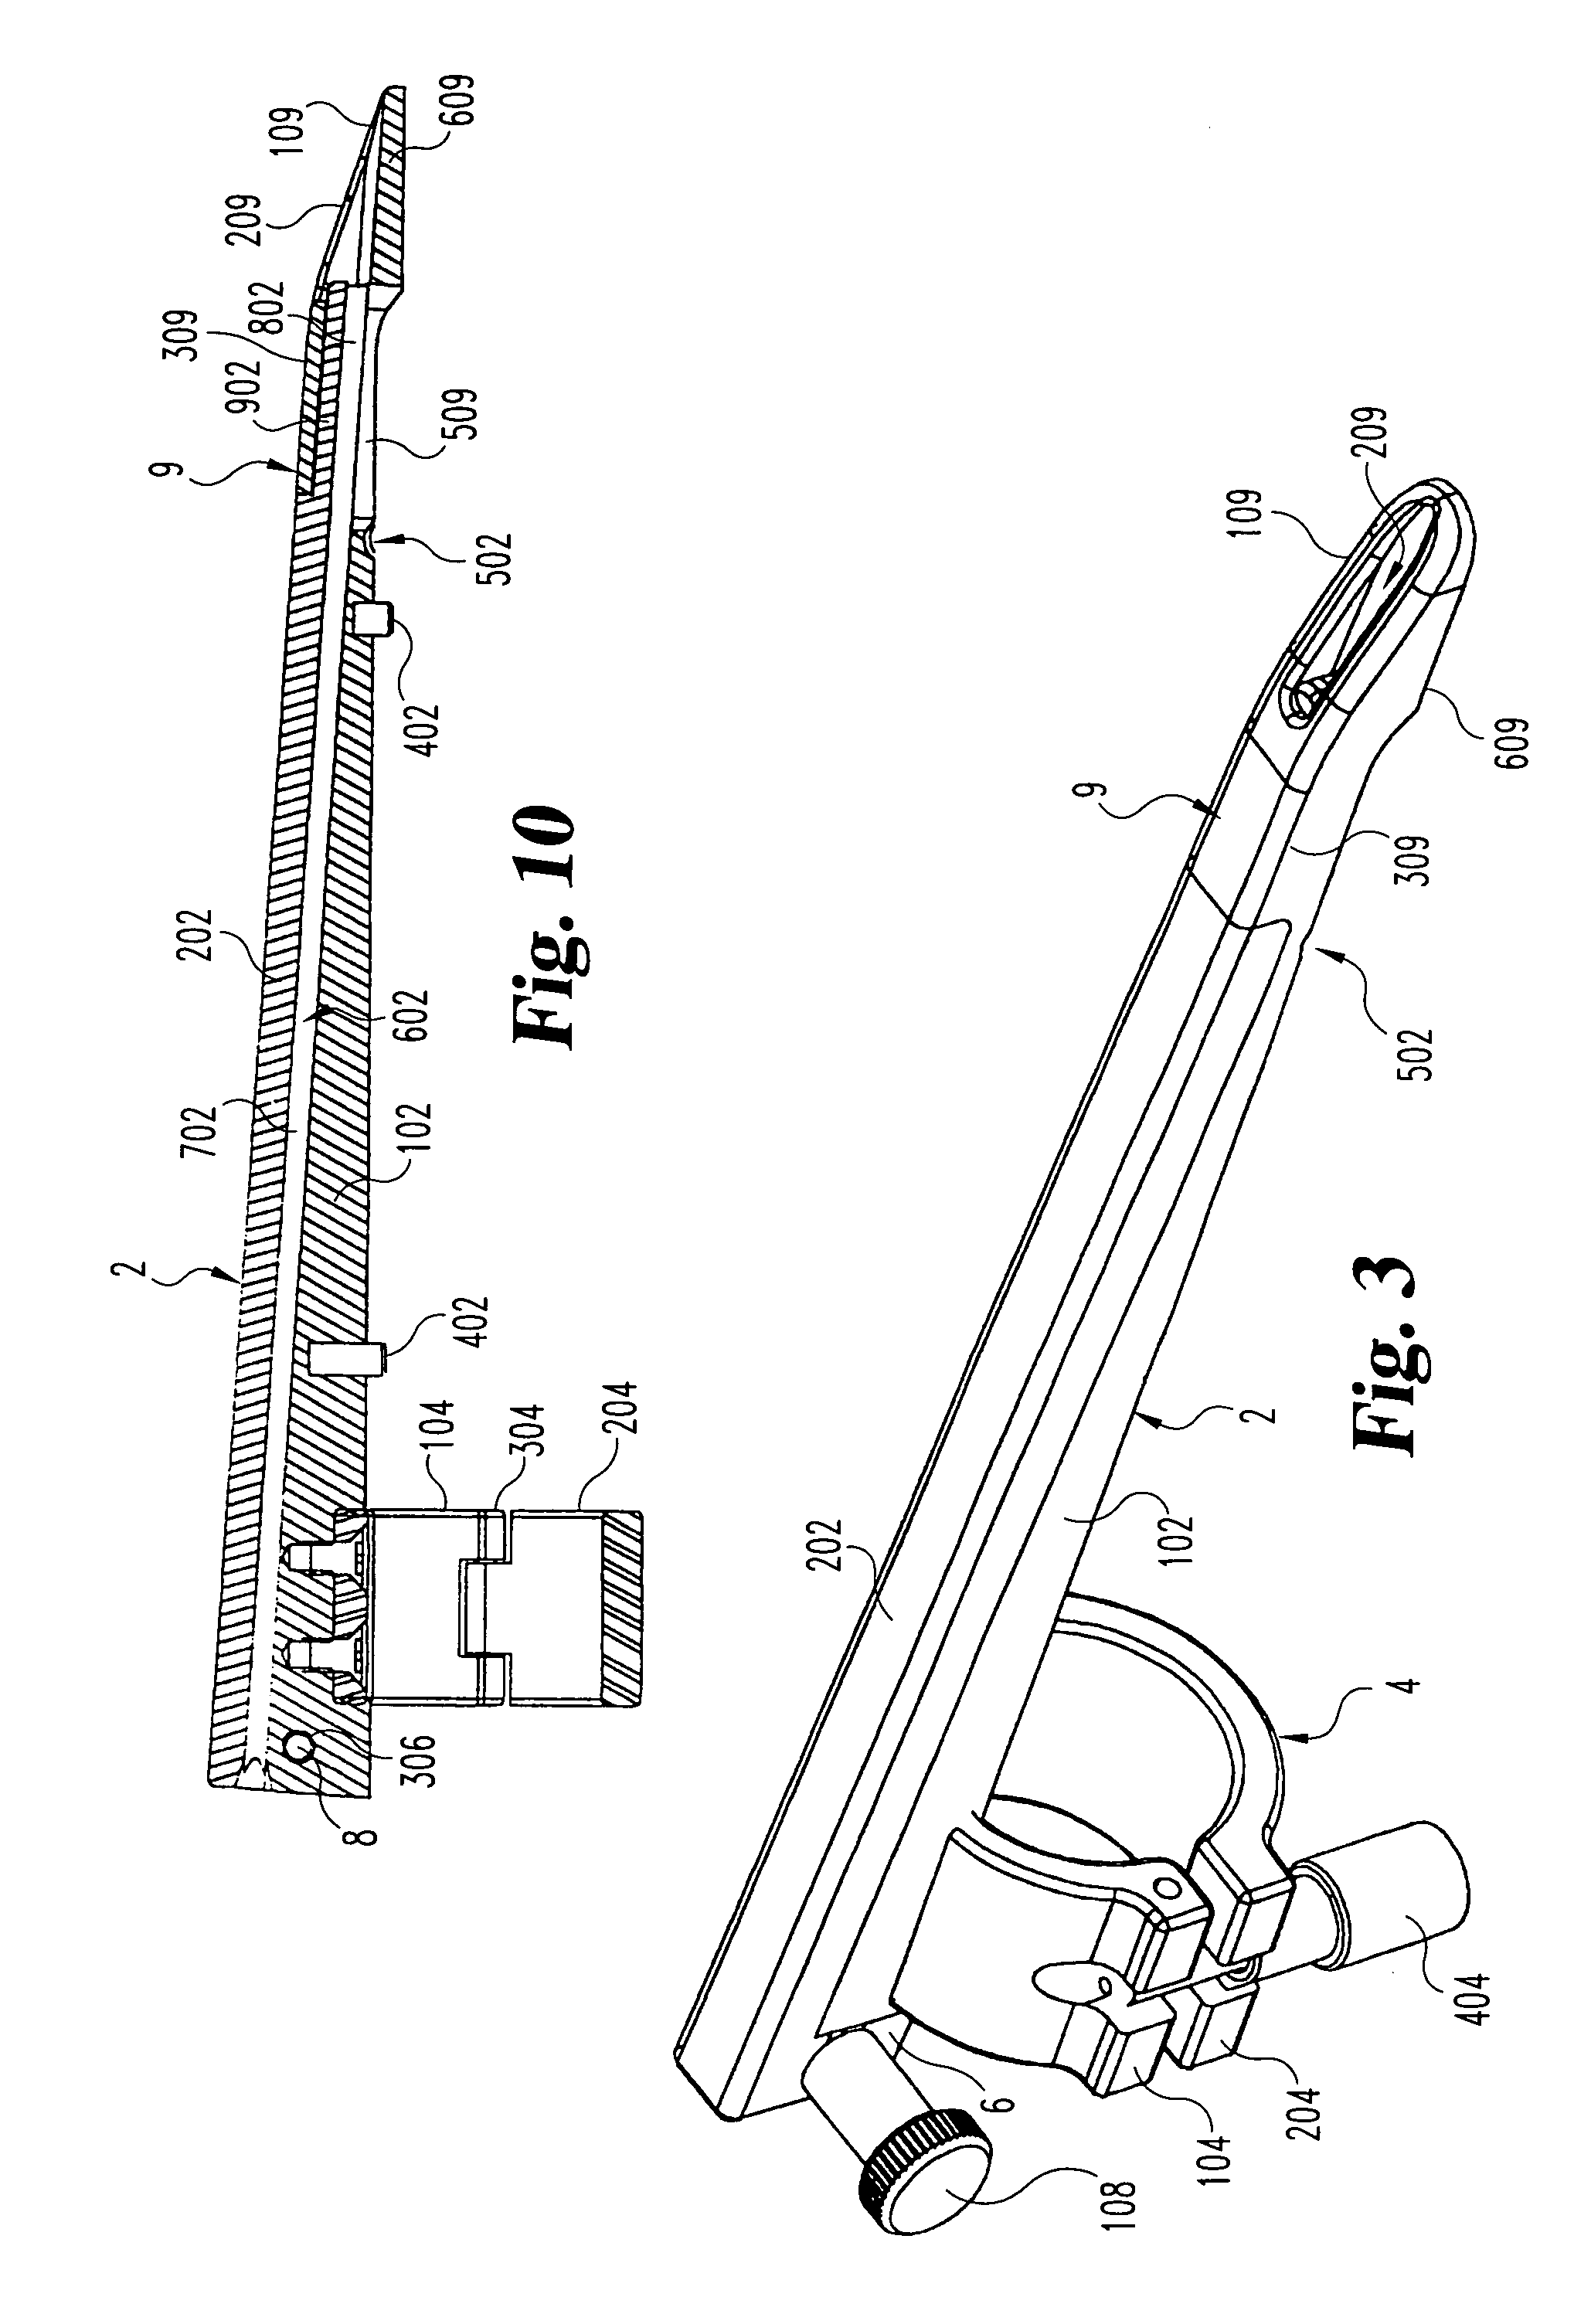 Needle-guide device, particularly for ultrasound probes